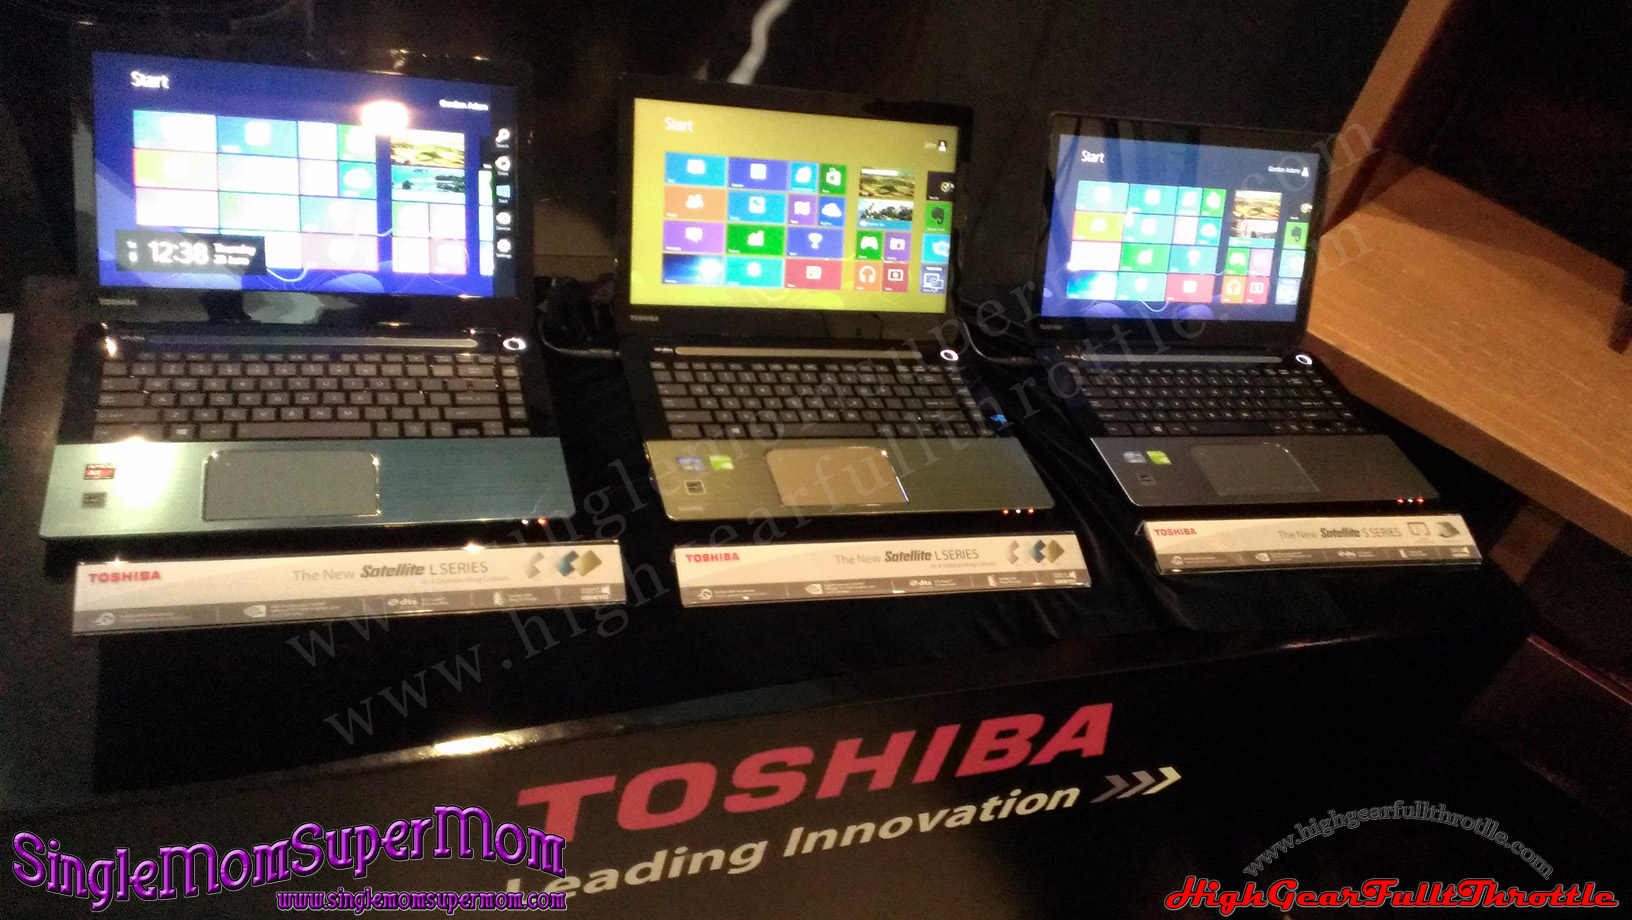 Toshiba Philippines launched their high-end laptops